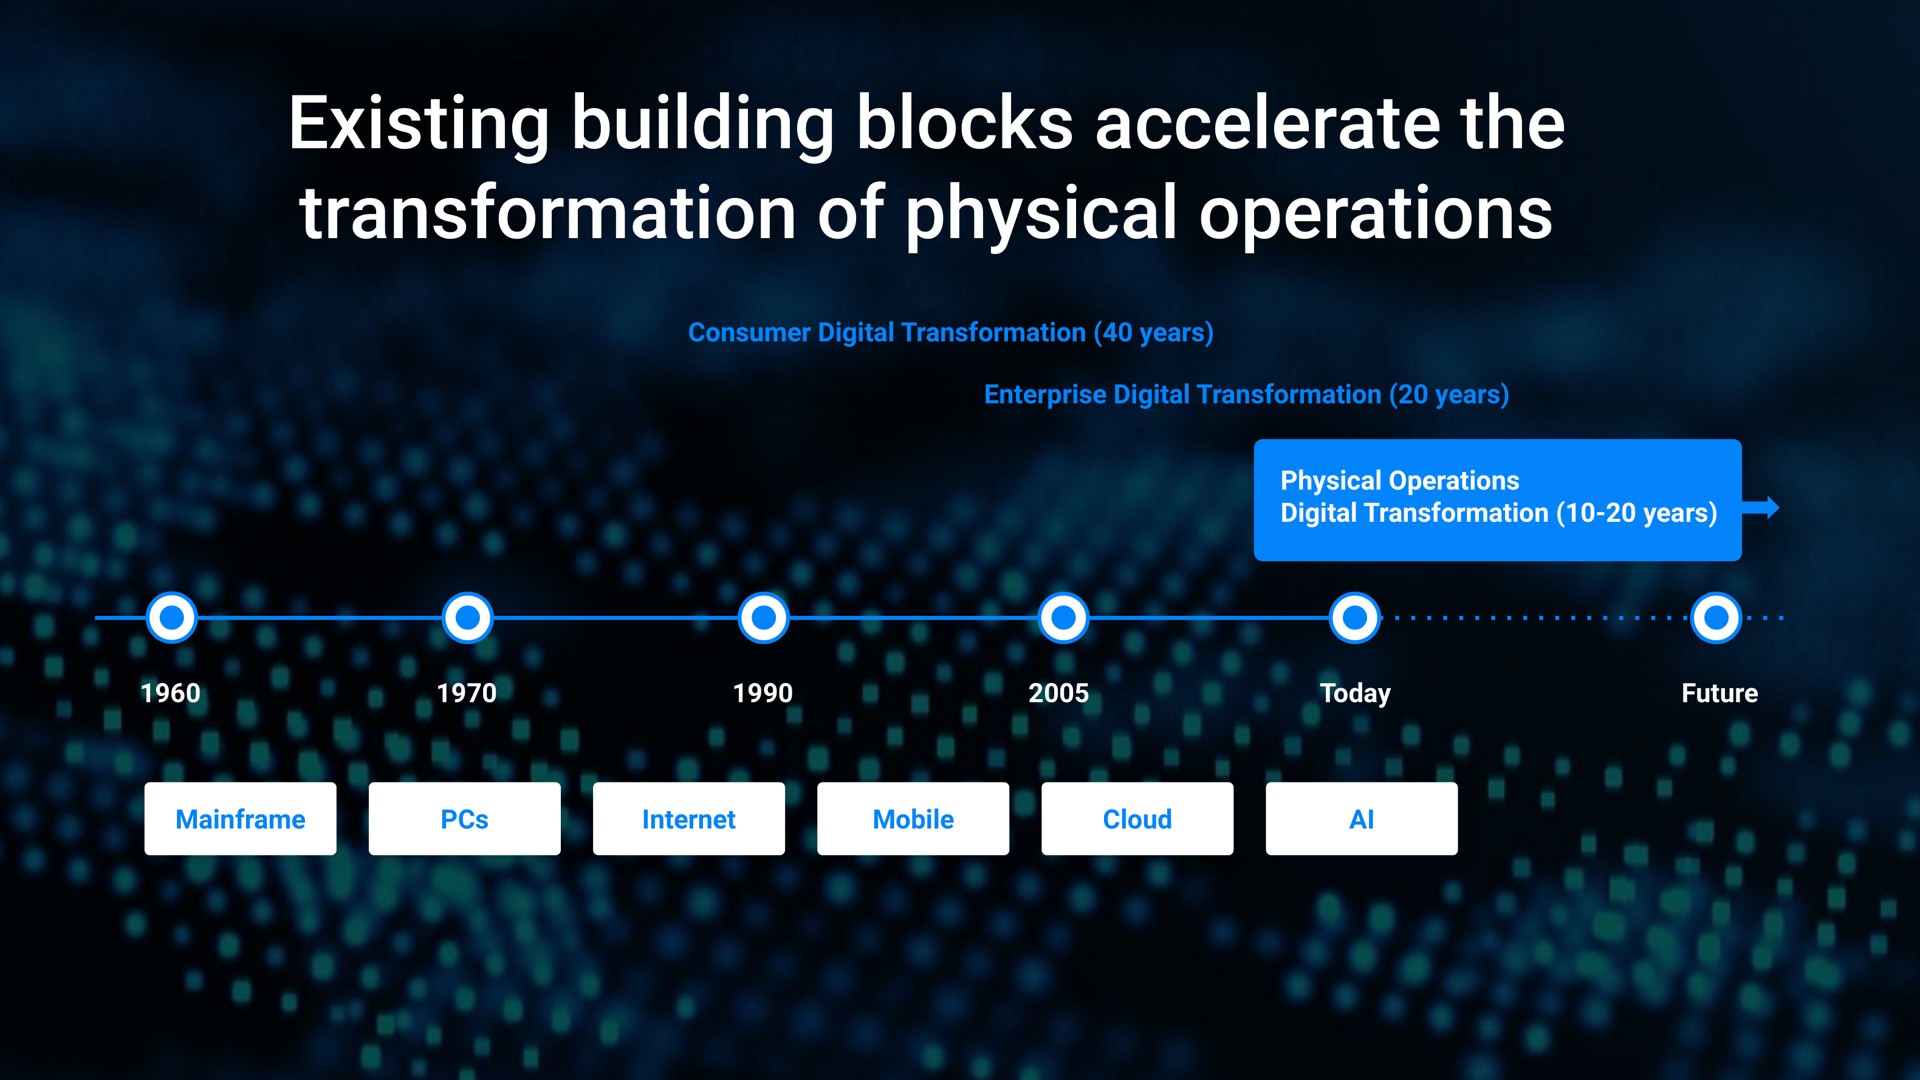 existing building blocks accelerate the transformation of physical operations consumer digital transformation years enterprise digital transformation years physical operations digital transformation years today future mobile cloud | Samsara